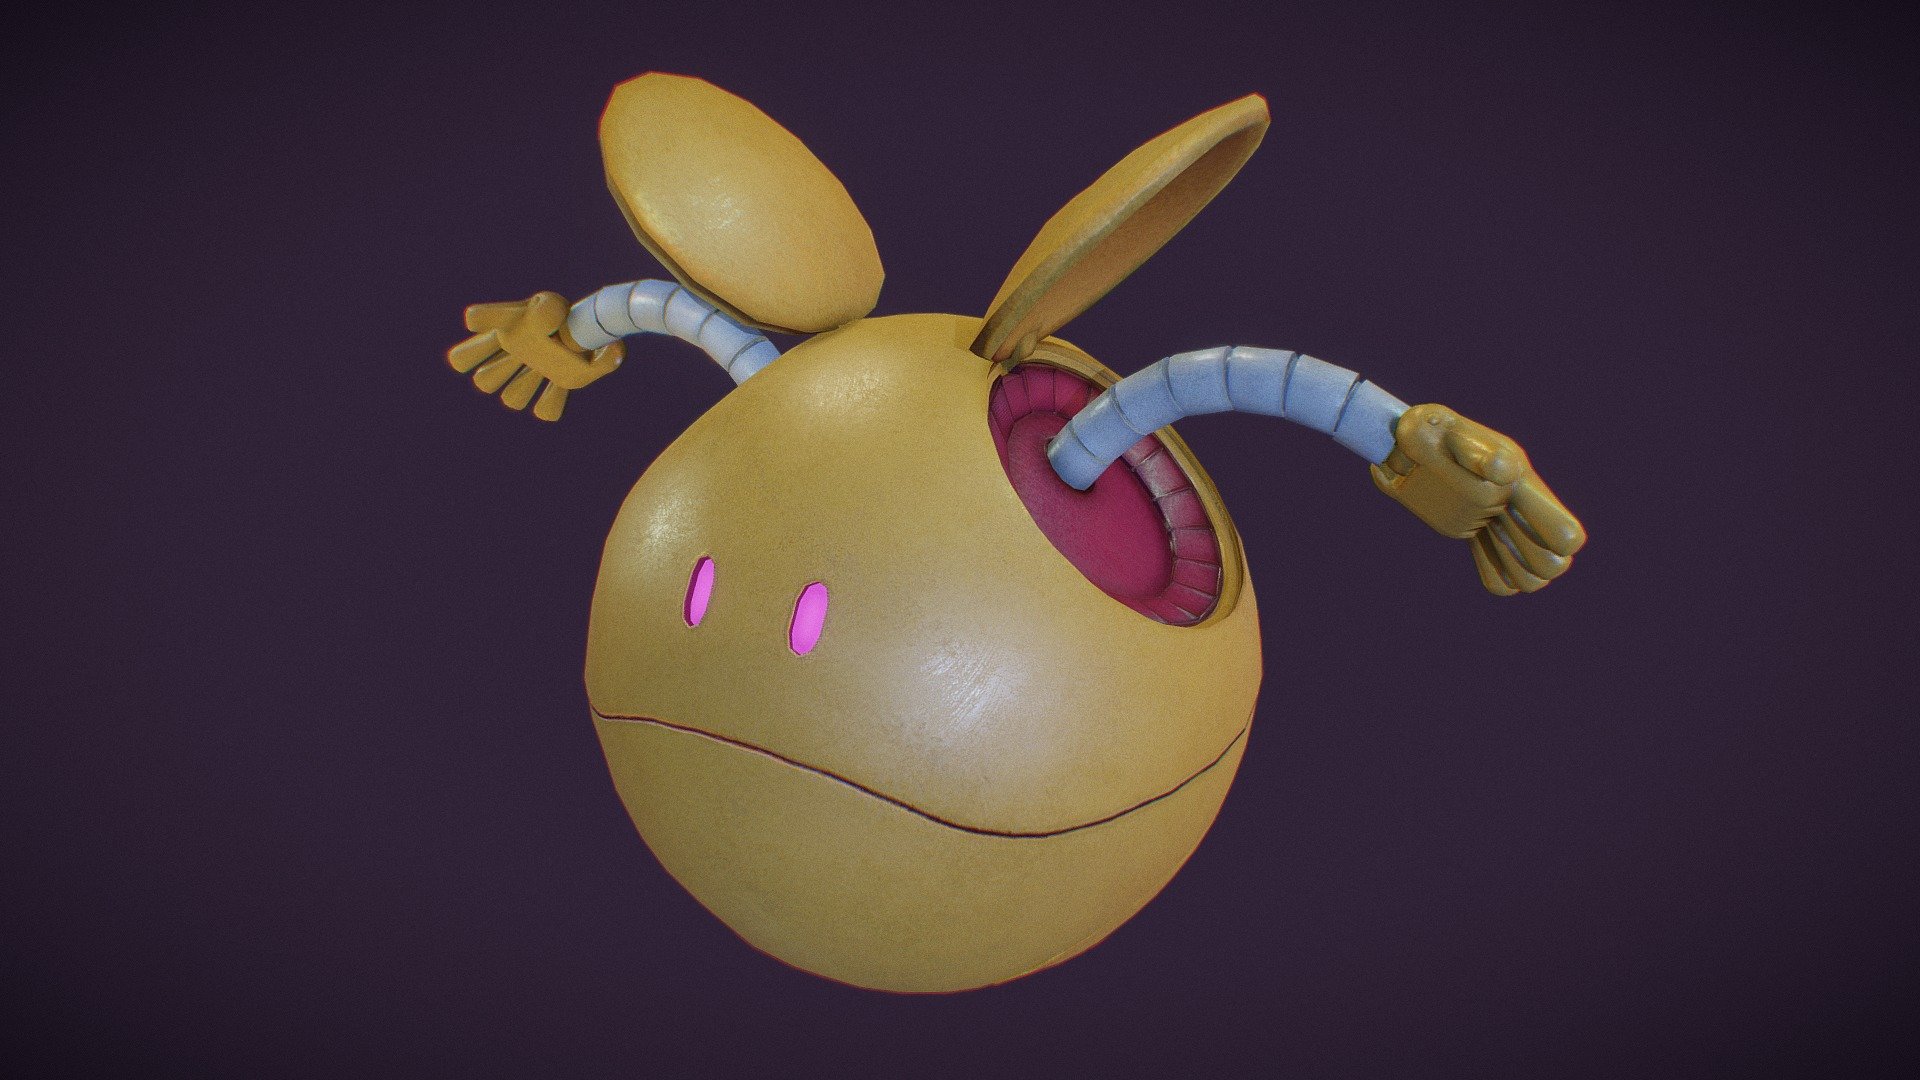 My boyfriend got me into this cool anime called Gundam, after binging some episodes I started modelling this little robot :)
Lock-on Lock-on!! The Haro are mass-produced assistant robots to Celestial Being in the Anime Mobile Suit Gundam 00.
This little model is made in Blender and textured with substance painter.
I also rigged and rendered a small animation using Blender 3d model